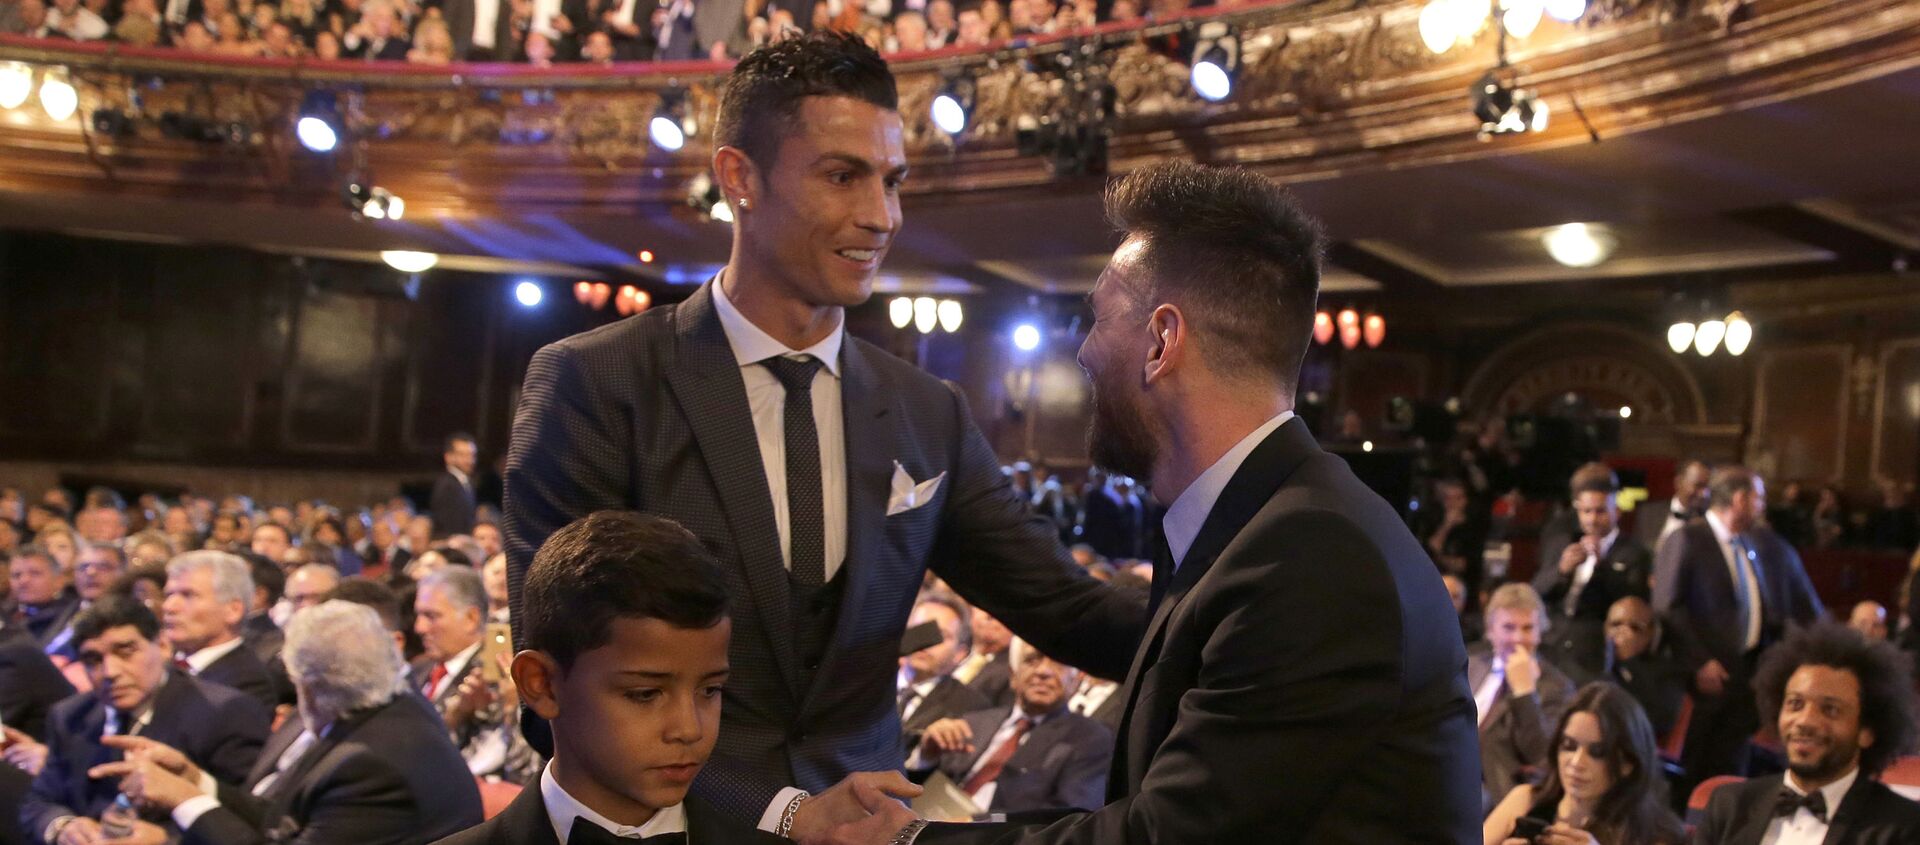 Portuguese soccer player Ronaldo, left, shakes hands with Argentine soccer player Lionel Messi during the The Best FIFA 2017 Awards at the Palladium Theatre in London, Monday, 23 October 2017. - Sputnik International, 1920, 14.02.2021